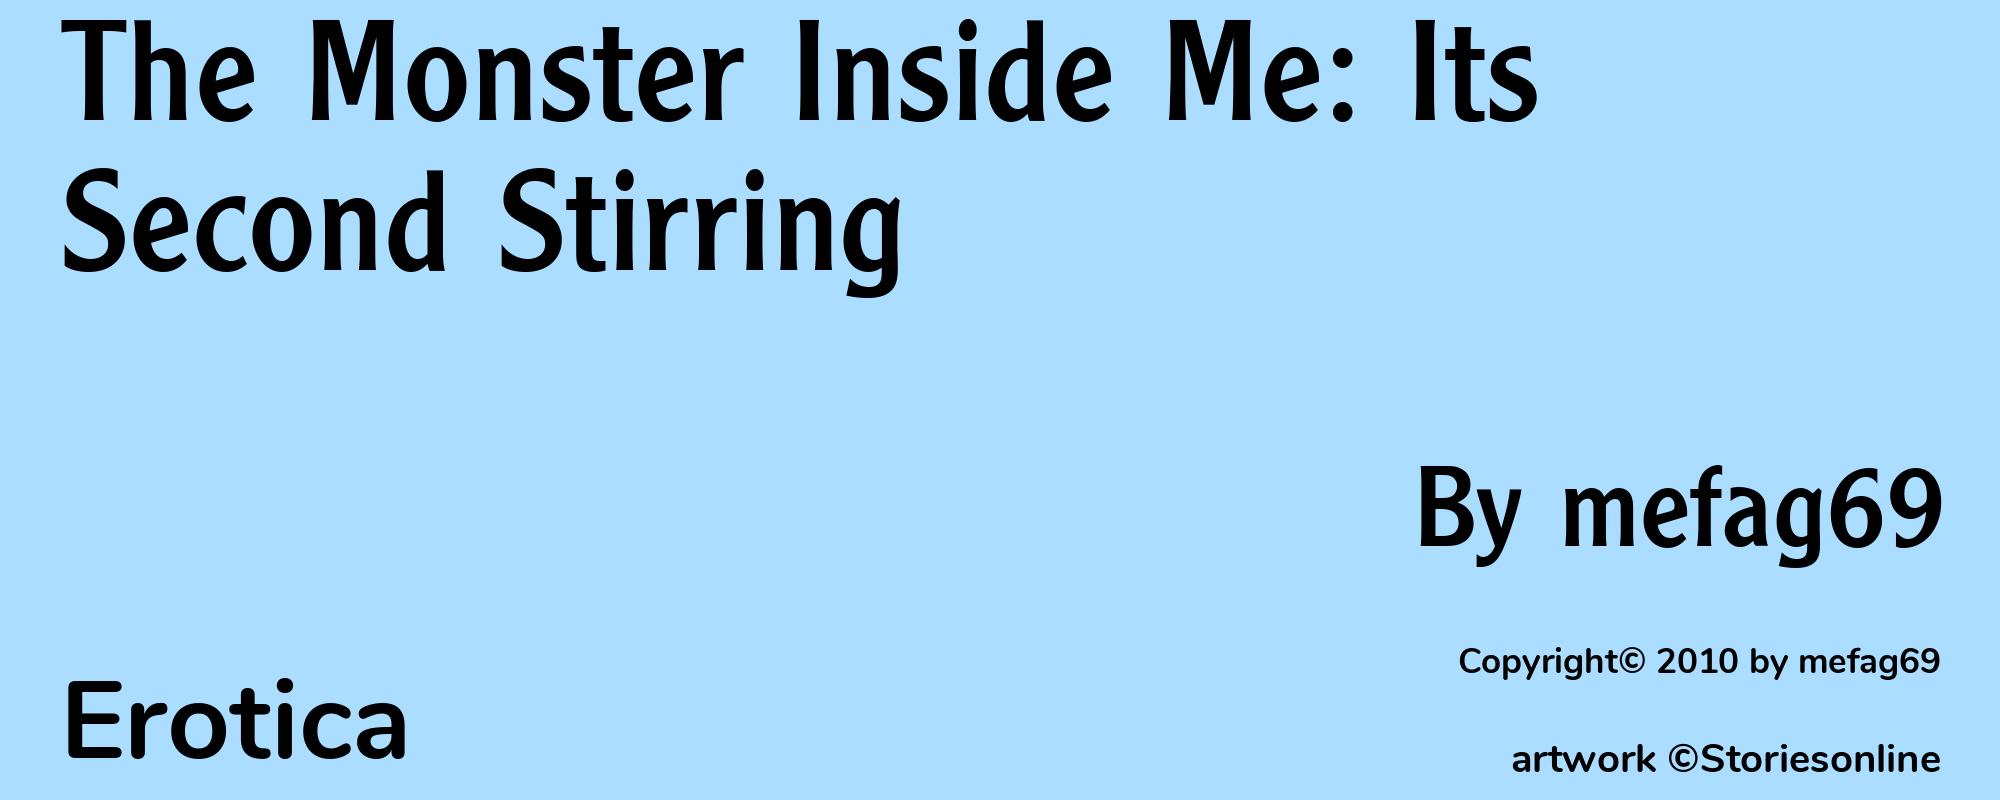 The Monster Inside Me: Its Second Stirring - Cover